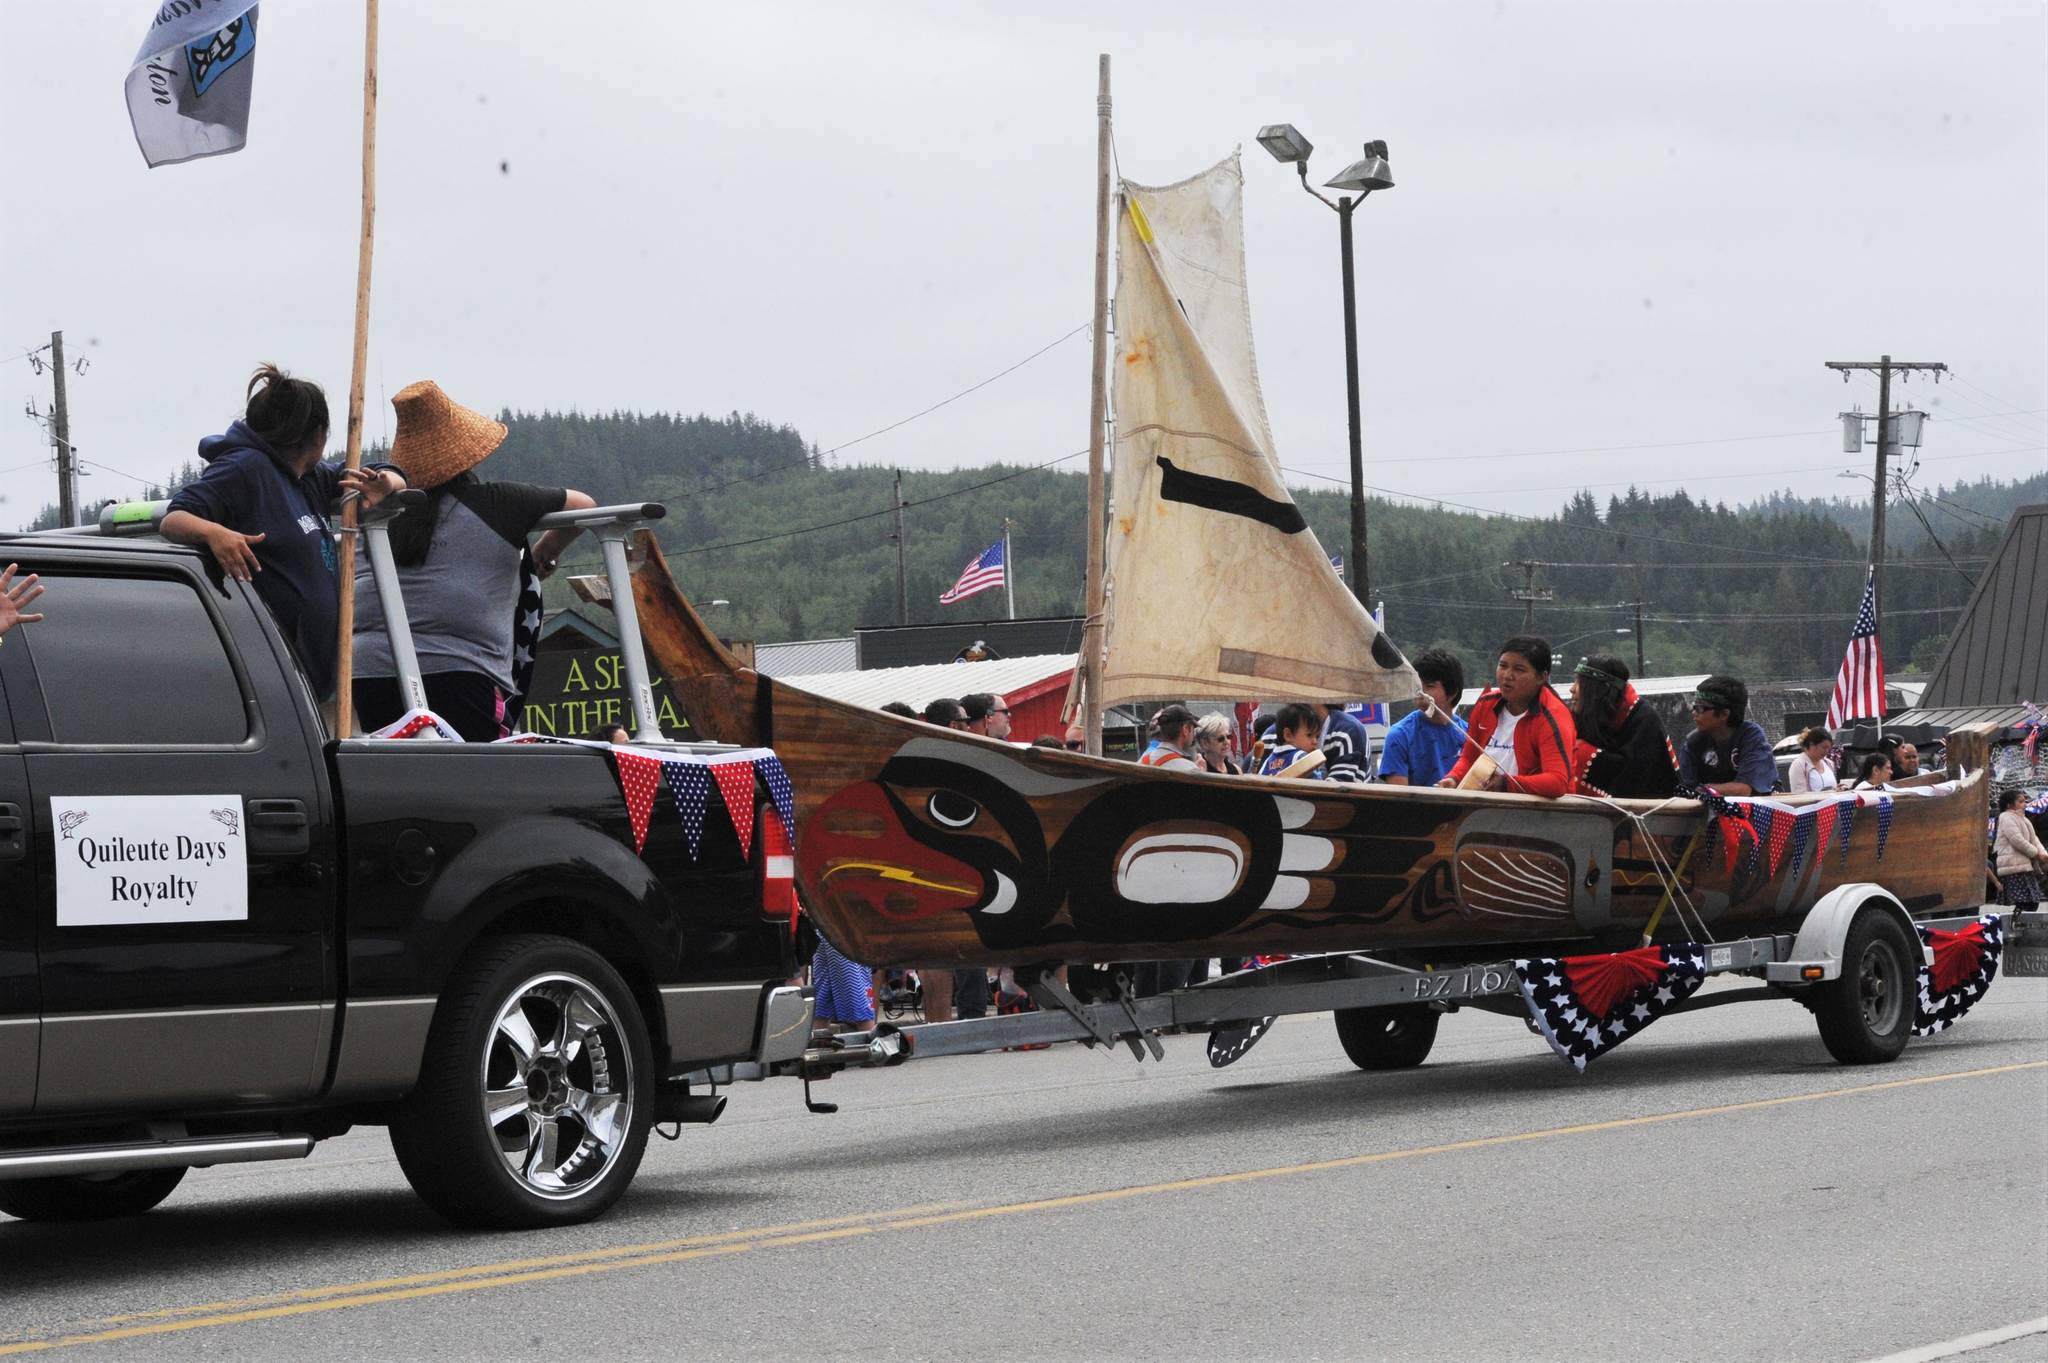 Forks Mayor Tim Fletcher selected the Quileute Days entry as the Mayor’s Choice award in the 4th of July parade. Photo Lonnie Archibald